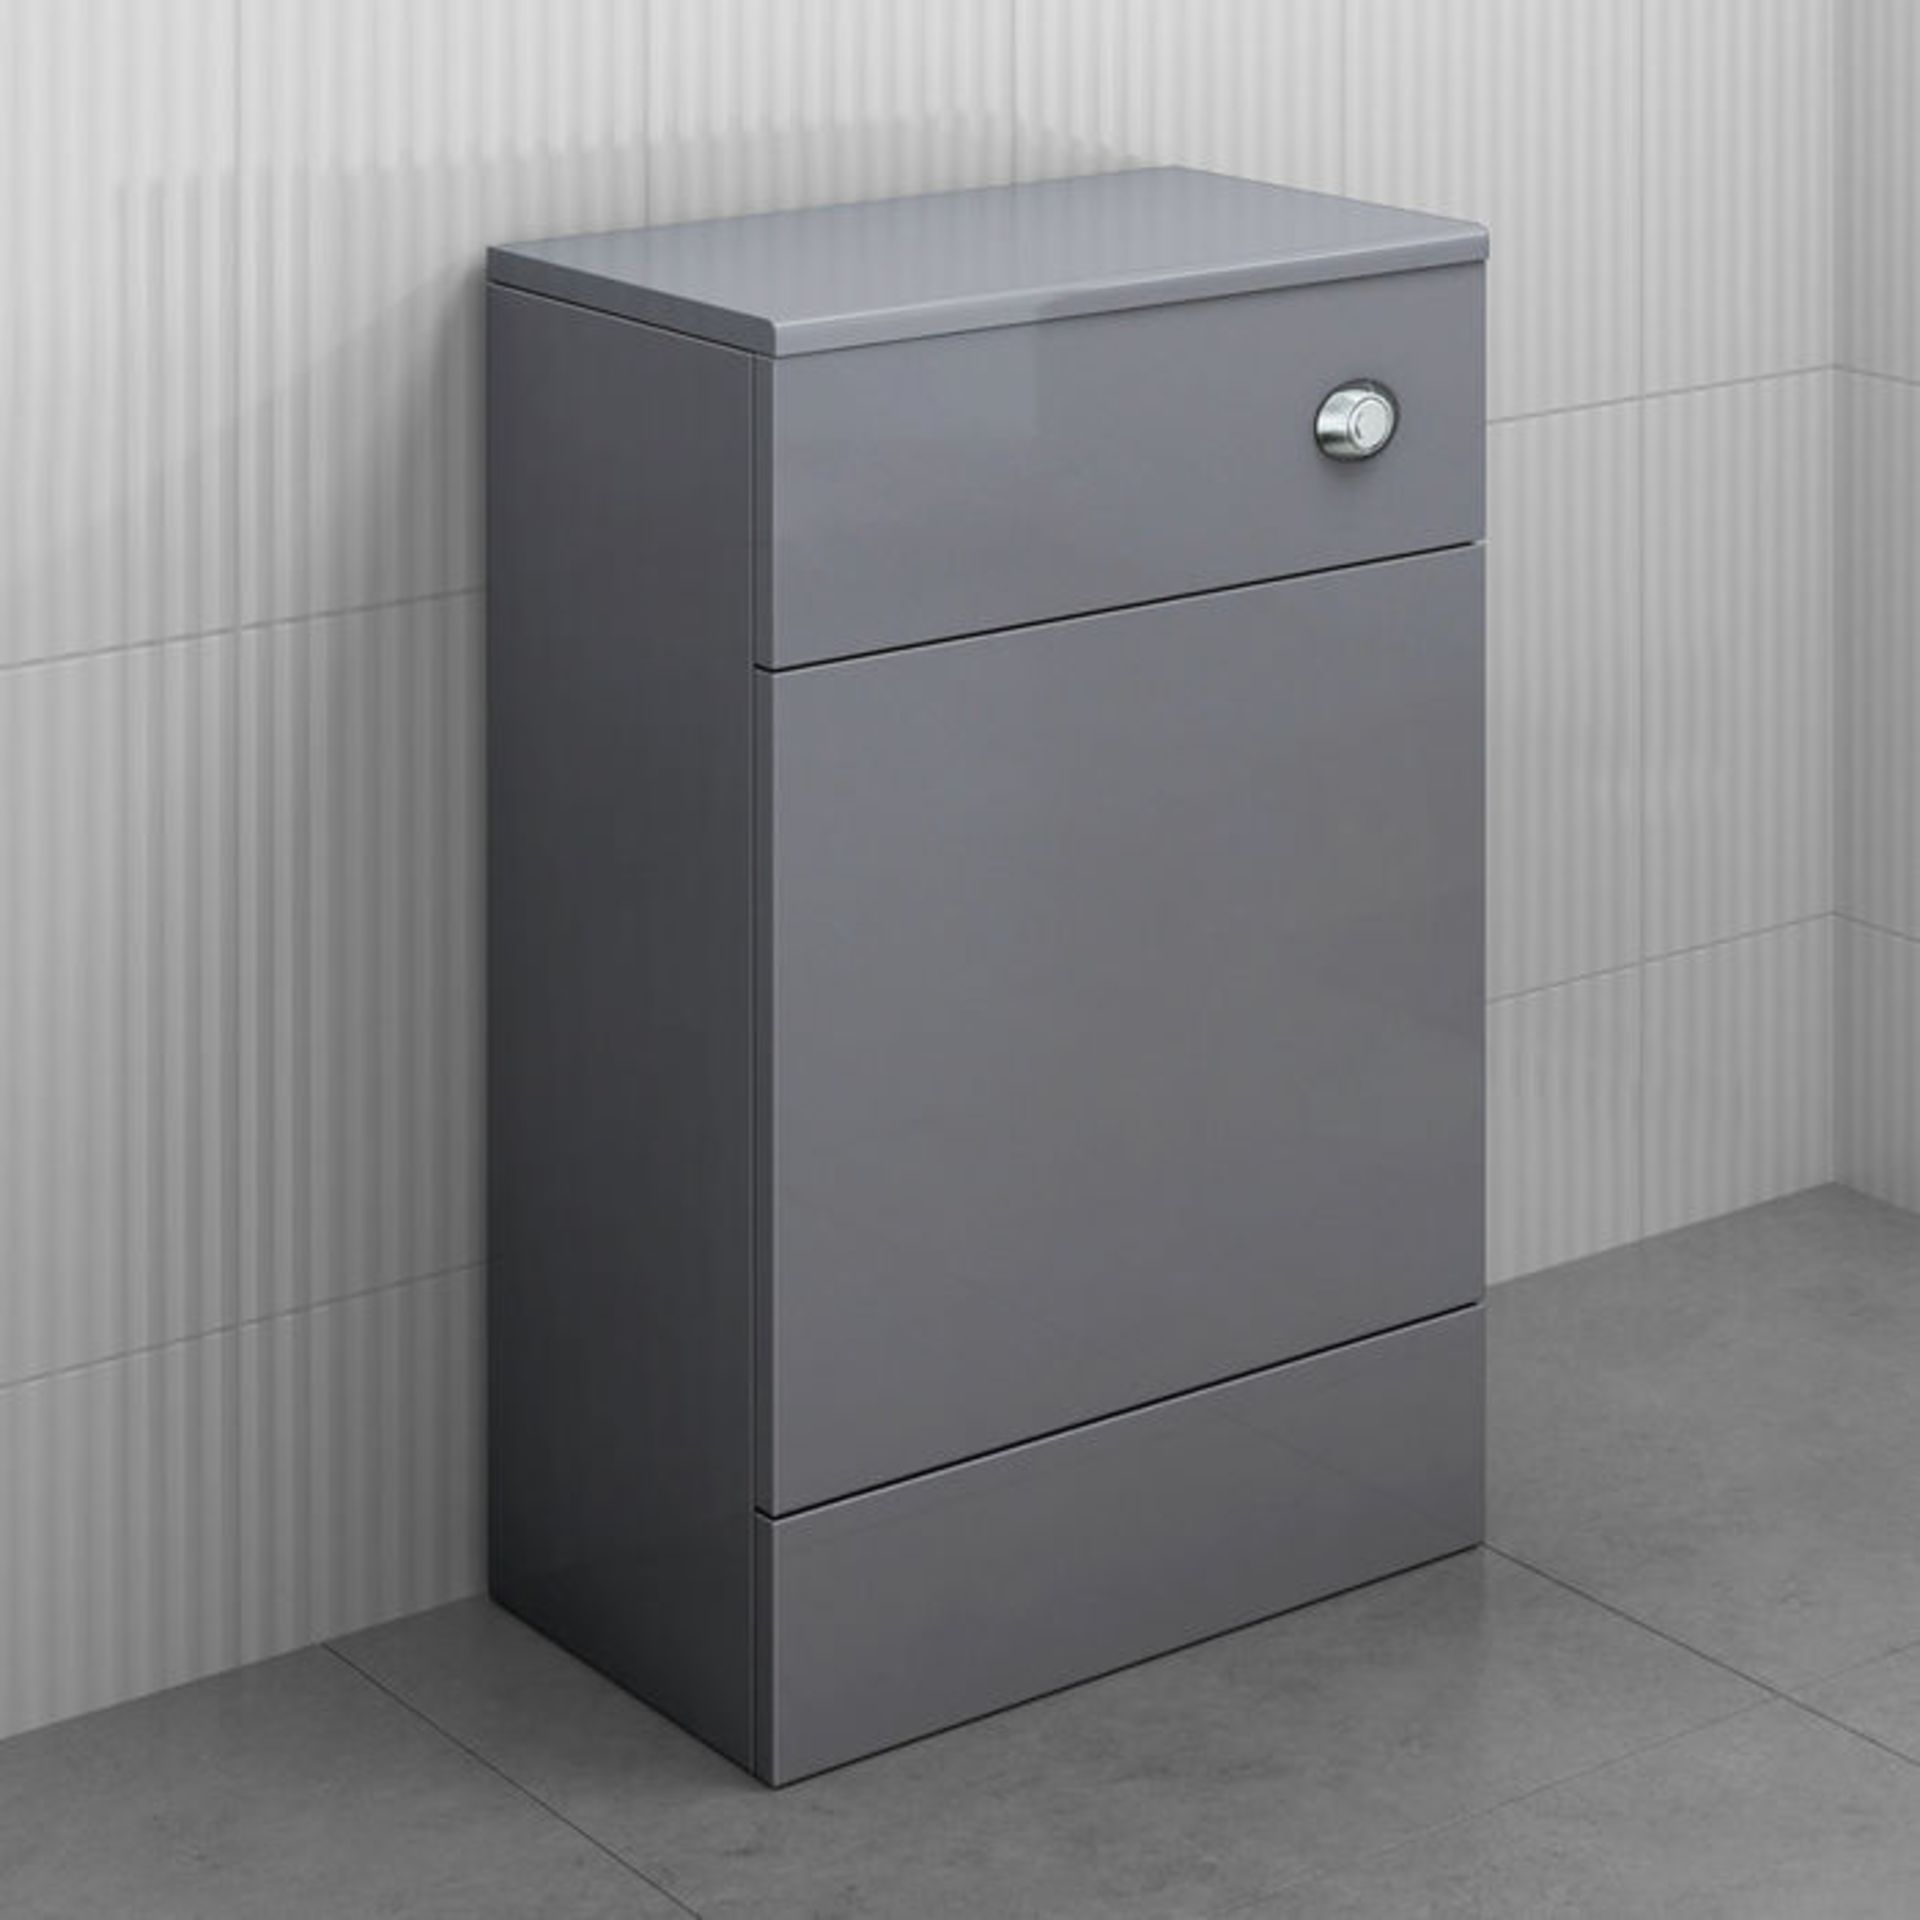 (ZZ55) 500mm Harper Gloss Grey Back To Wall Toilet Unit. RRP £109.99. Our discreet unit cleverly